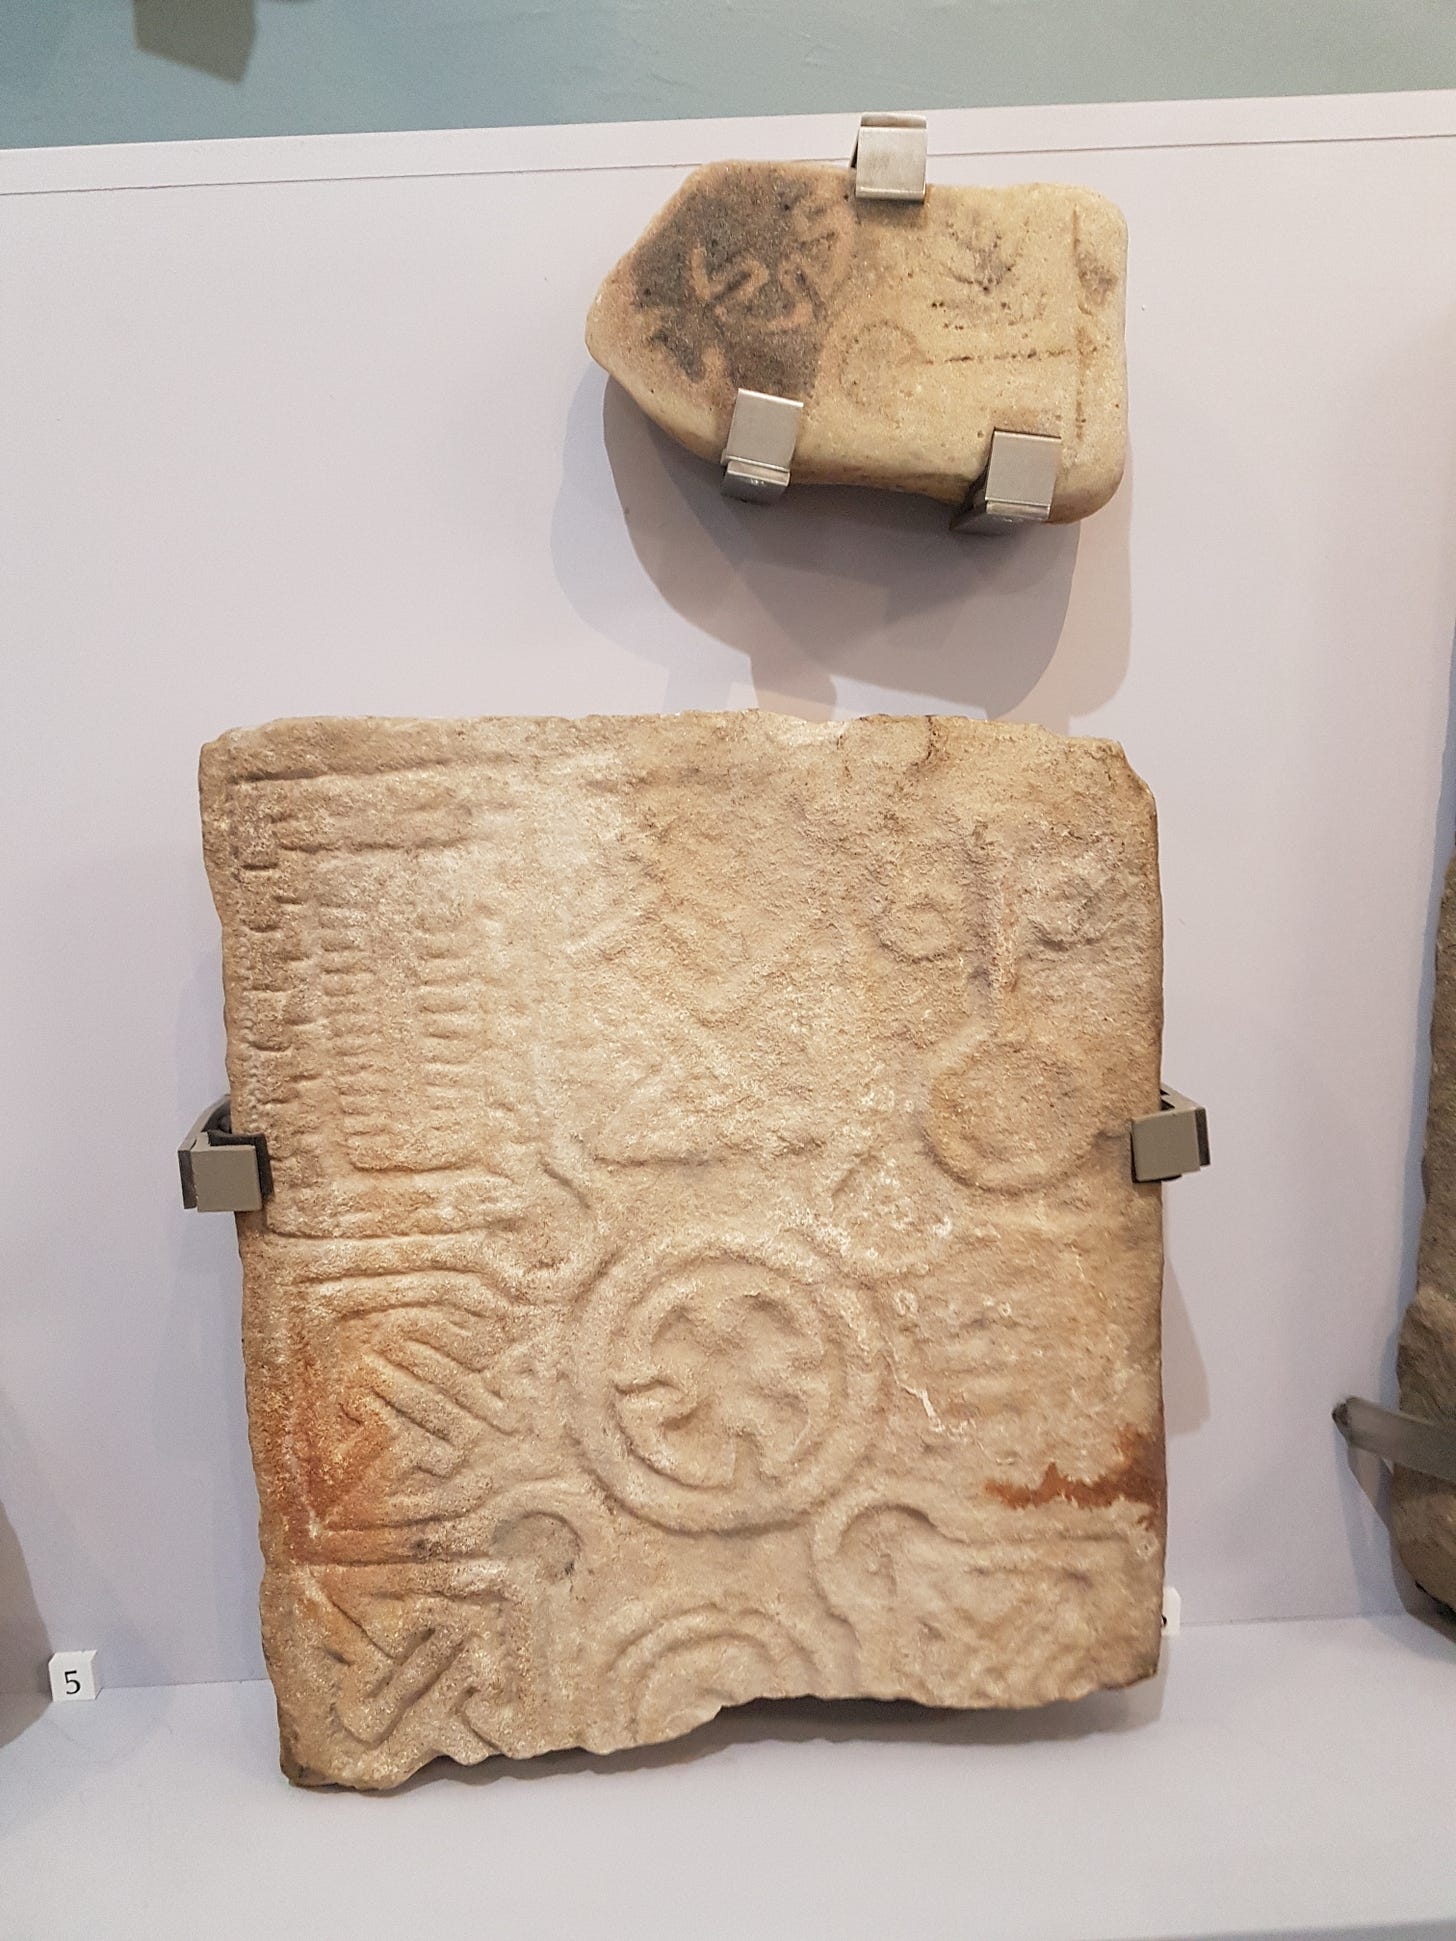 The Kinloss Stone and Drainie 32 displayed together in Elgin Museum. Drainie 32 is larger and has a cross head with interlace-filled arms and a Maltese cross-style roundel in the centre. Pictish mirror and comb symbols flank the top arm of the cross. There is key pattern decoration flanking the shaft of the cross. The Kinloss Stone is a smaller fragment,, with a similar Maltese cross-style roundel and more decoration that is quite hard to make out. (Accession Number ELGNM 2019.10)